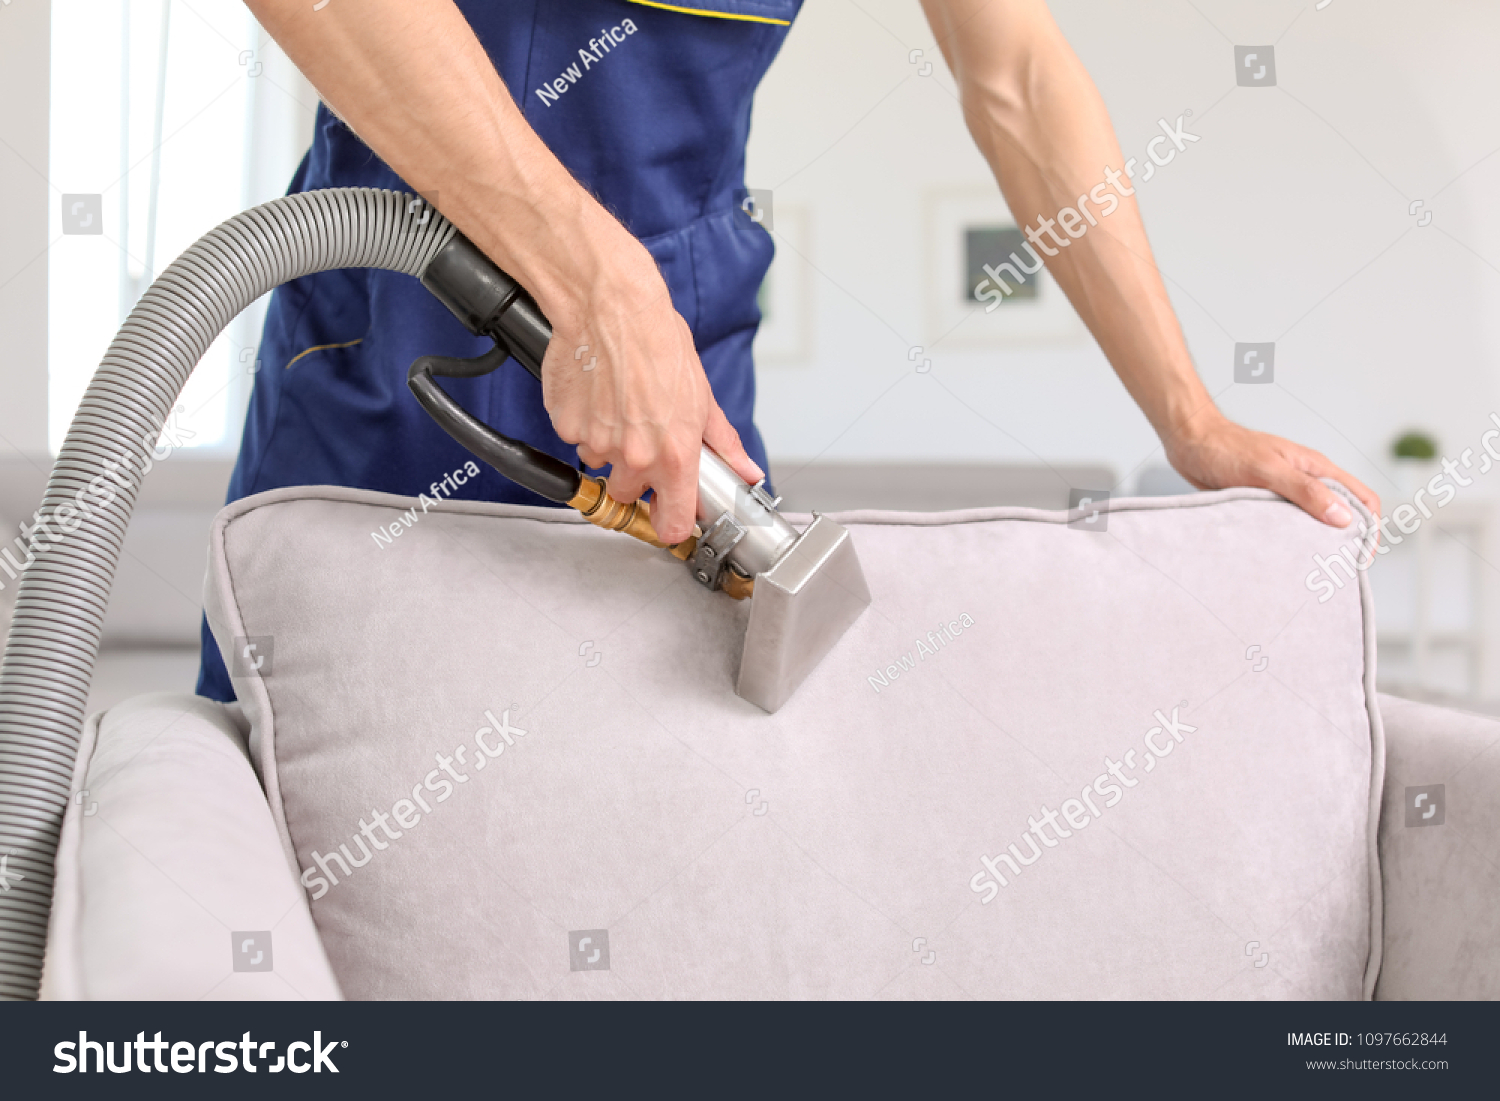 Dry cleaning worker removing dirt from armchair indoors #1097662844